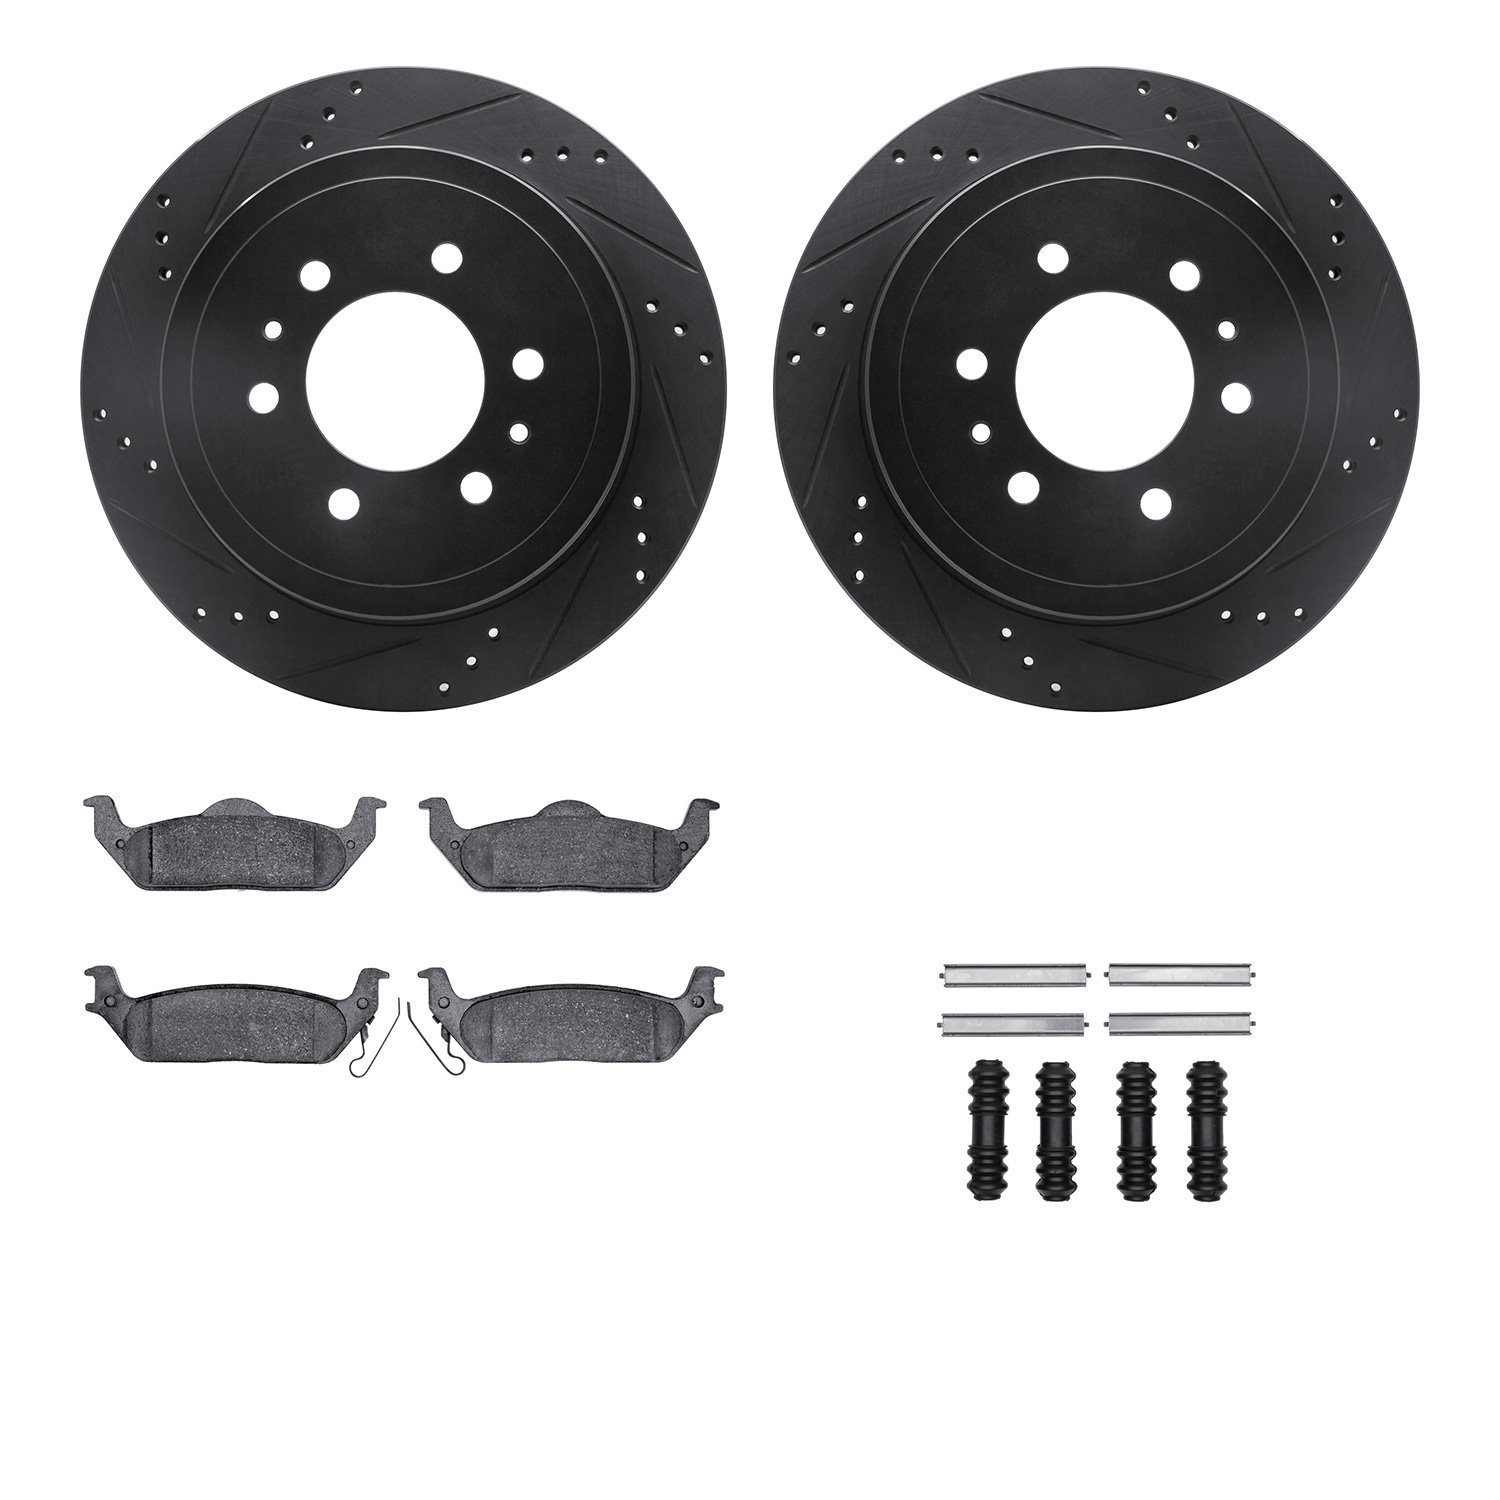 8412-54075 Drilled/Slotted Brake Rotors with Ultimate-Duty Brake Pads Kit & Hardware [Black], 2004-2011 Ford/Lincoln/Mercury/Maz